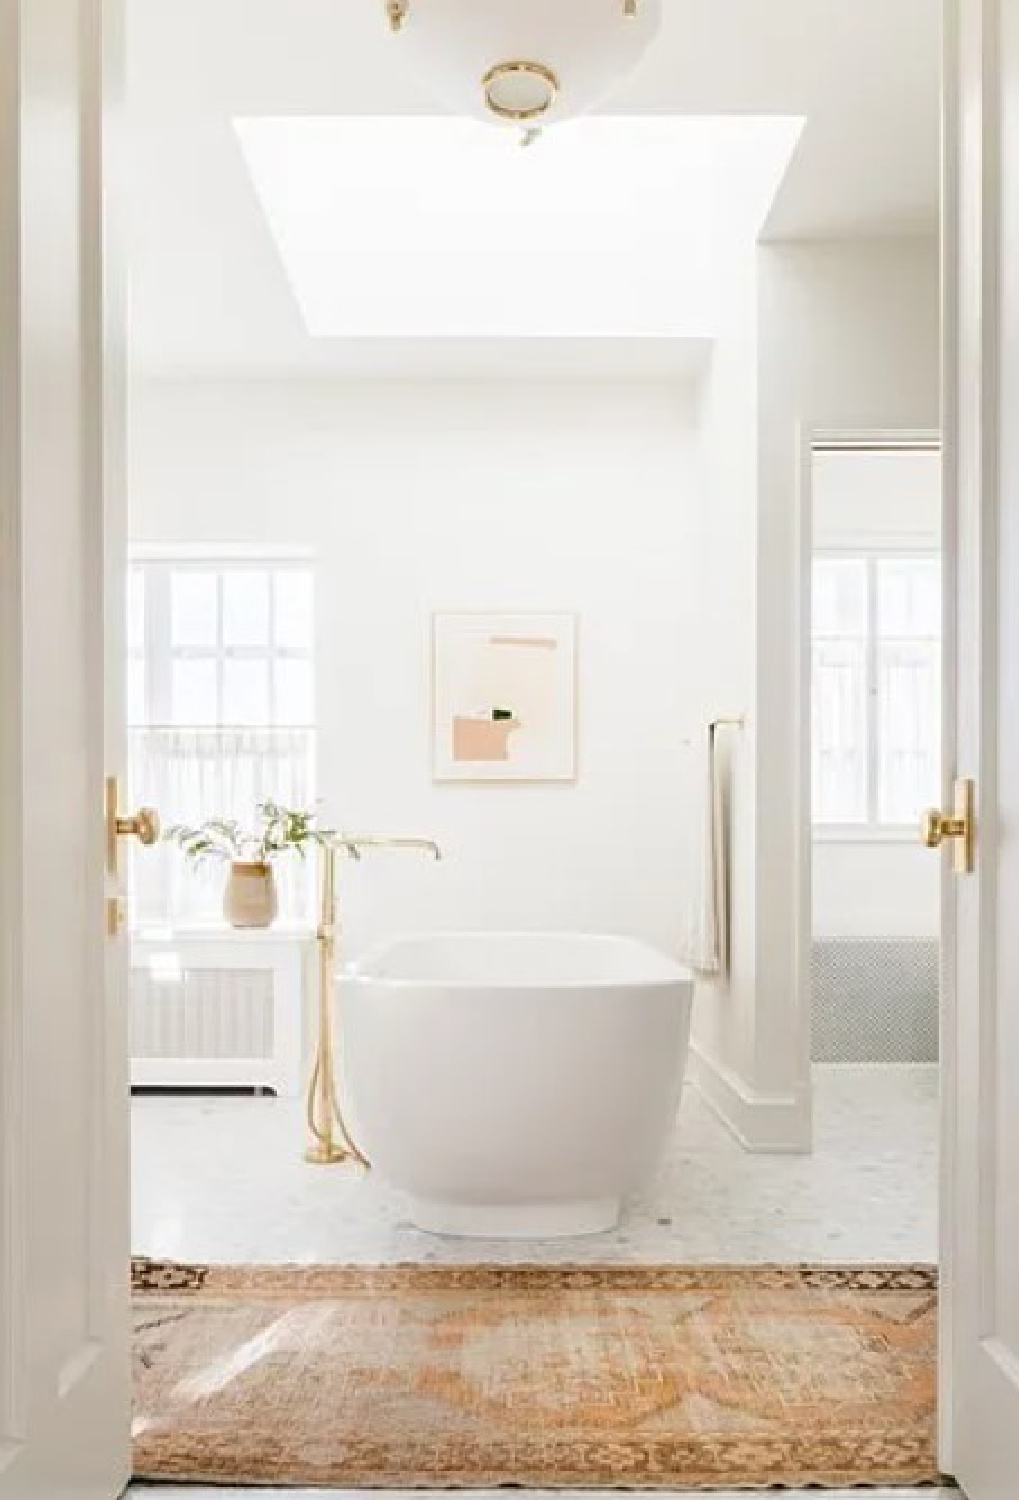 Soaking tub in bath of Kate Marker's 1920 white stucco Barrington Hills Home (160 N. Buckley Rd) with modern, serene, unfussy, timeless interiors. #katemarkerinteriors @thedawnmckennagroup #katemarkerhome